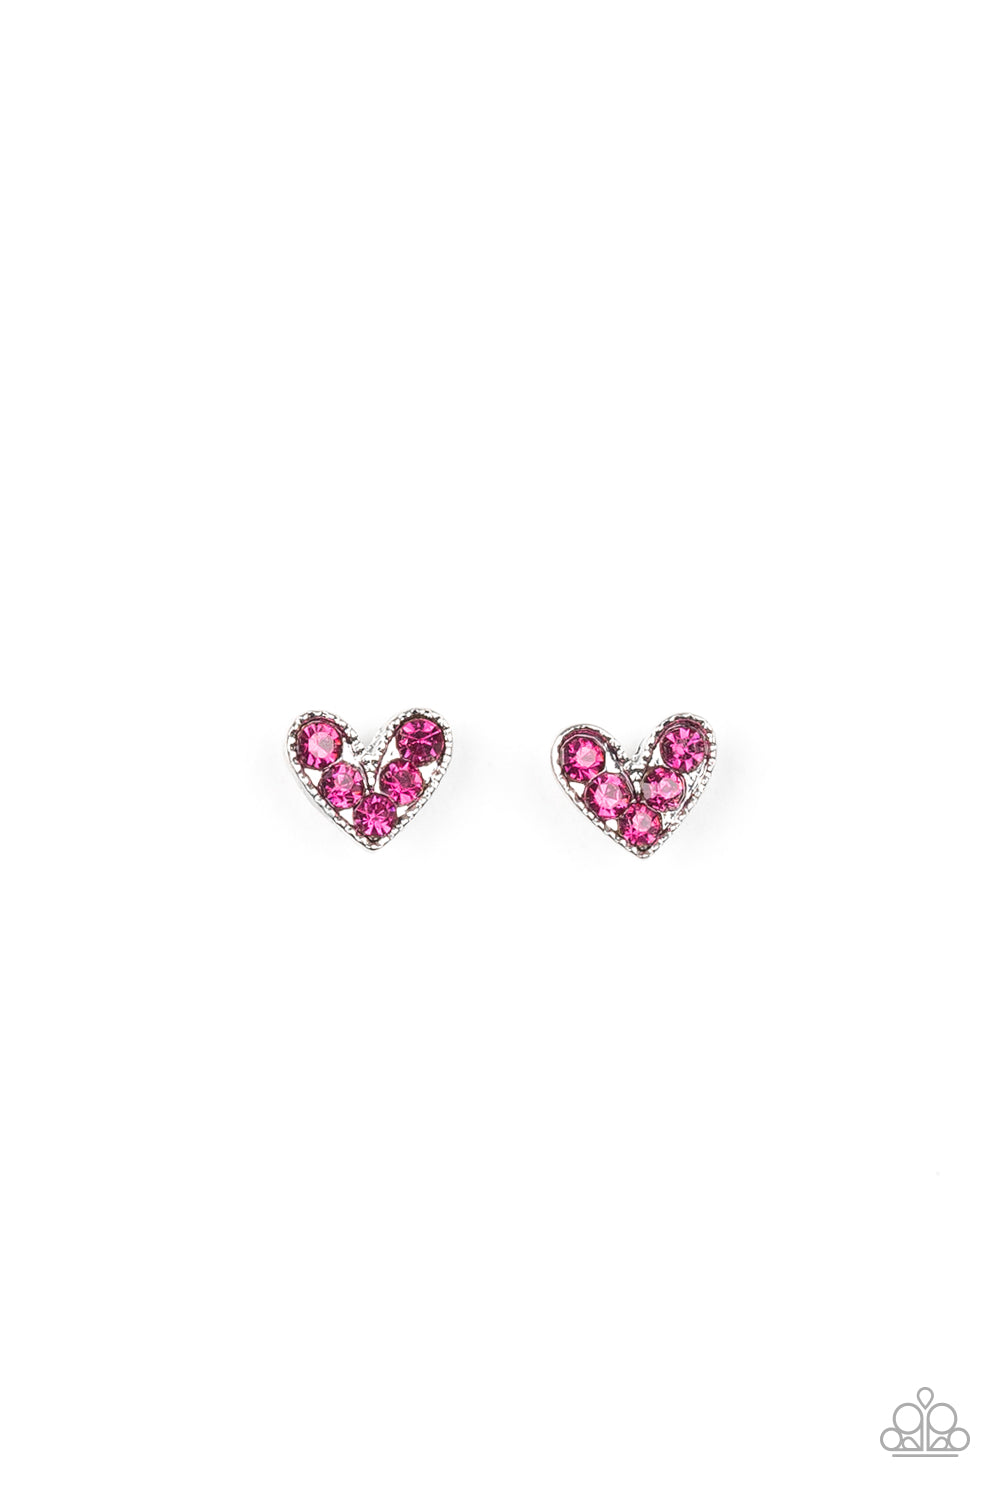 FOR THE LOVE OF PINK EARRINGS - SET OF 10 PAIRS OF EARRINGS